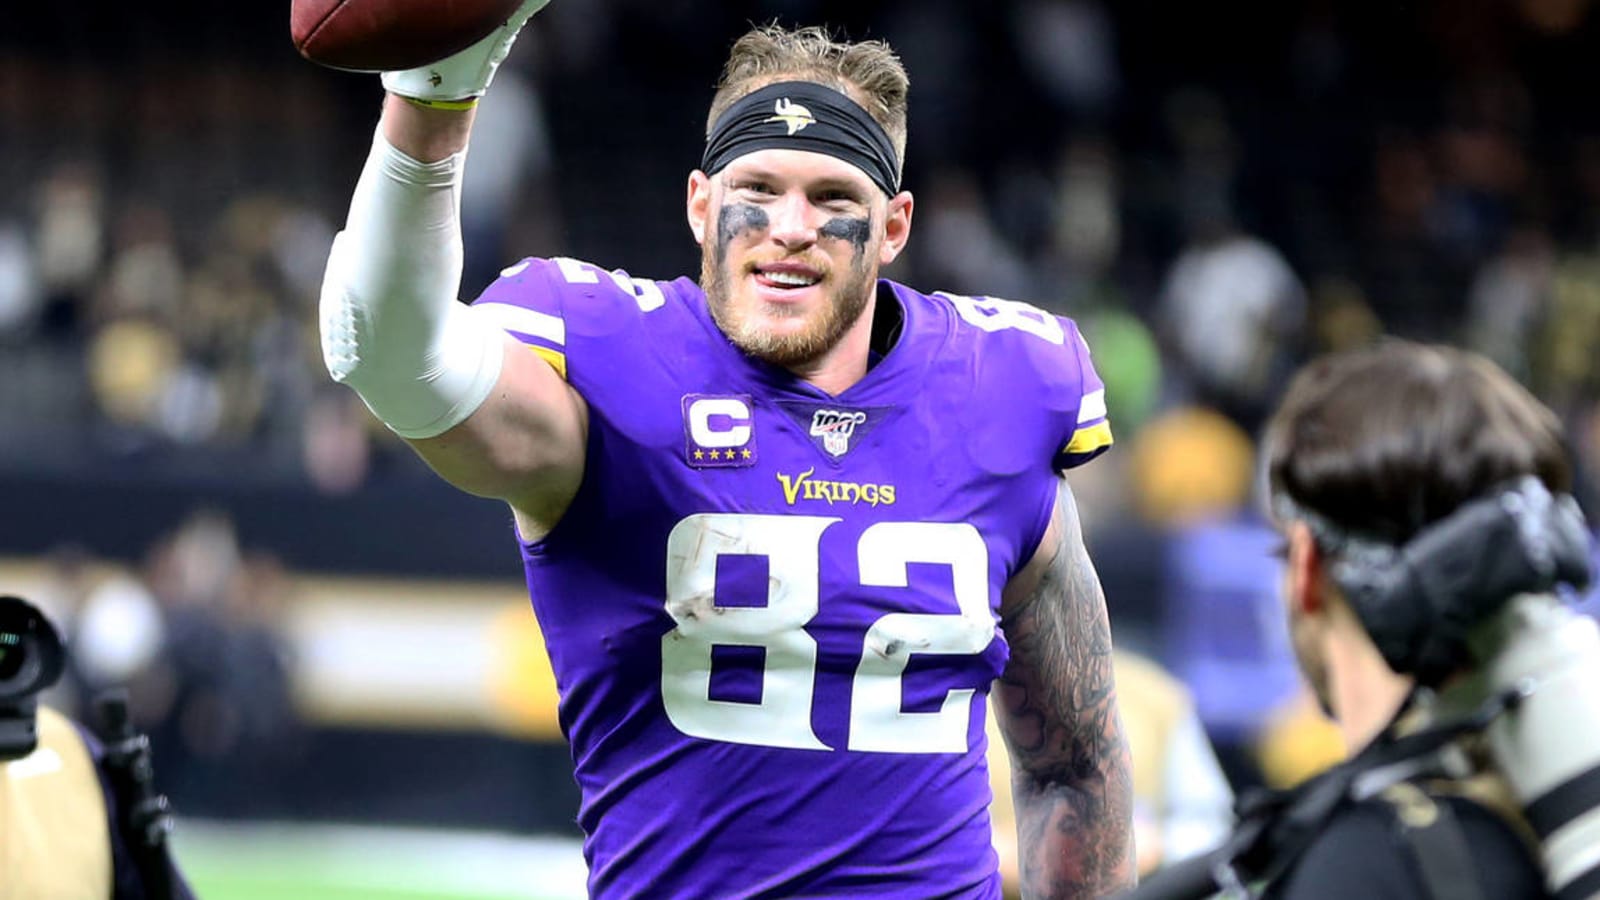 Giants sign Kyle Rudolph to two-year deal